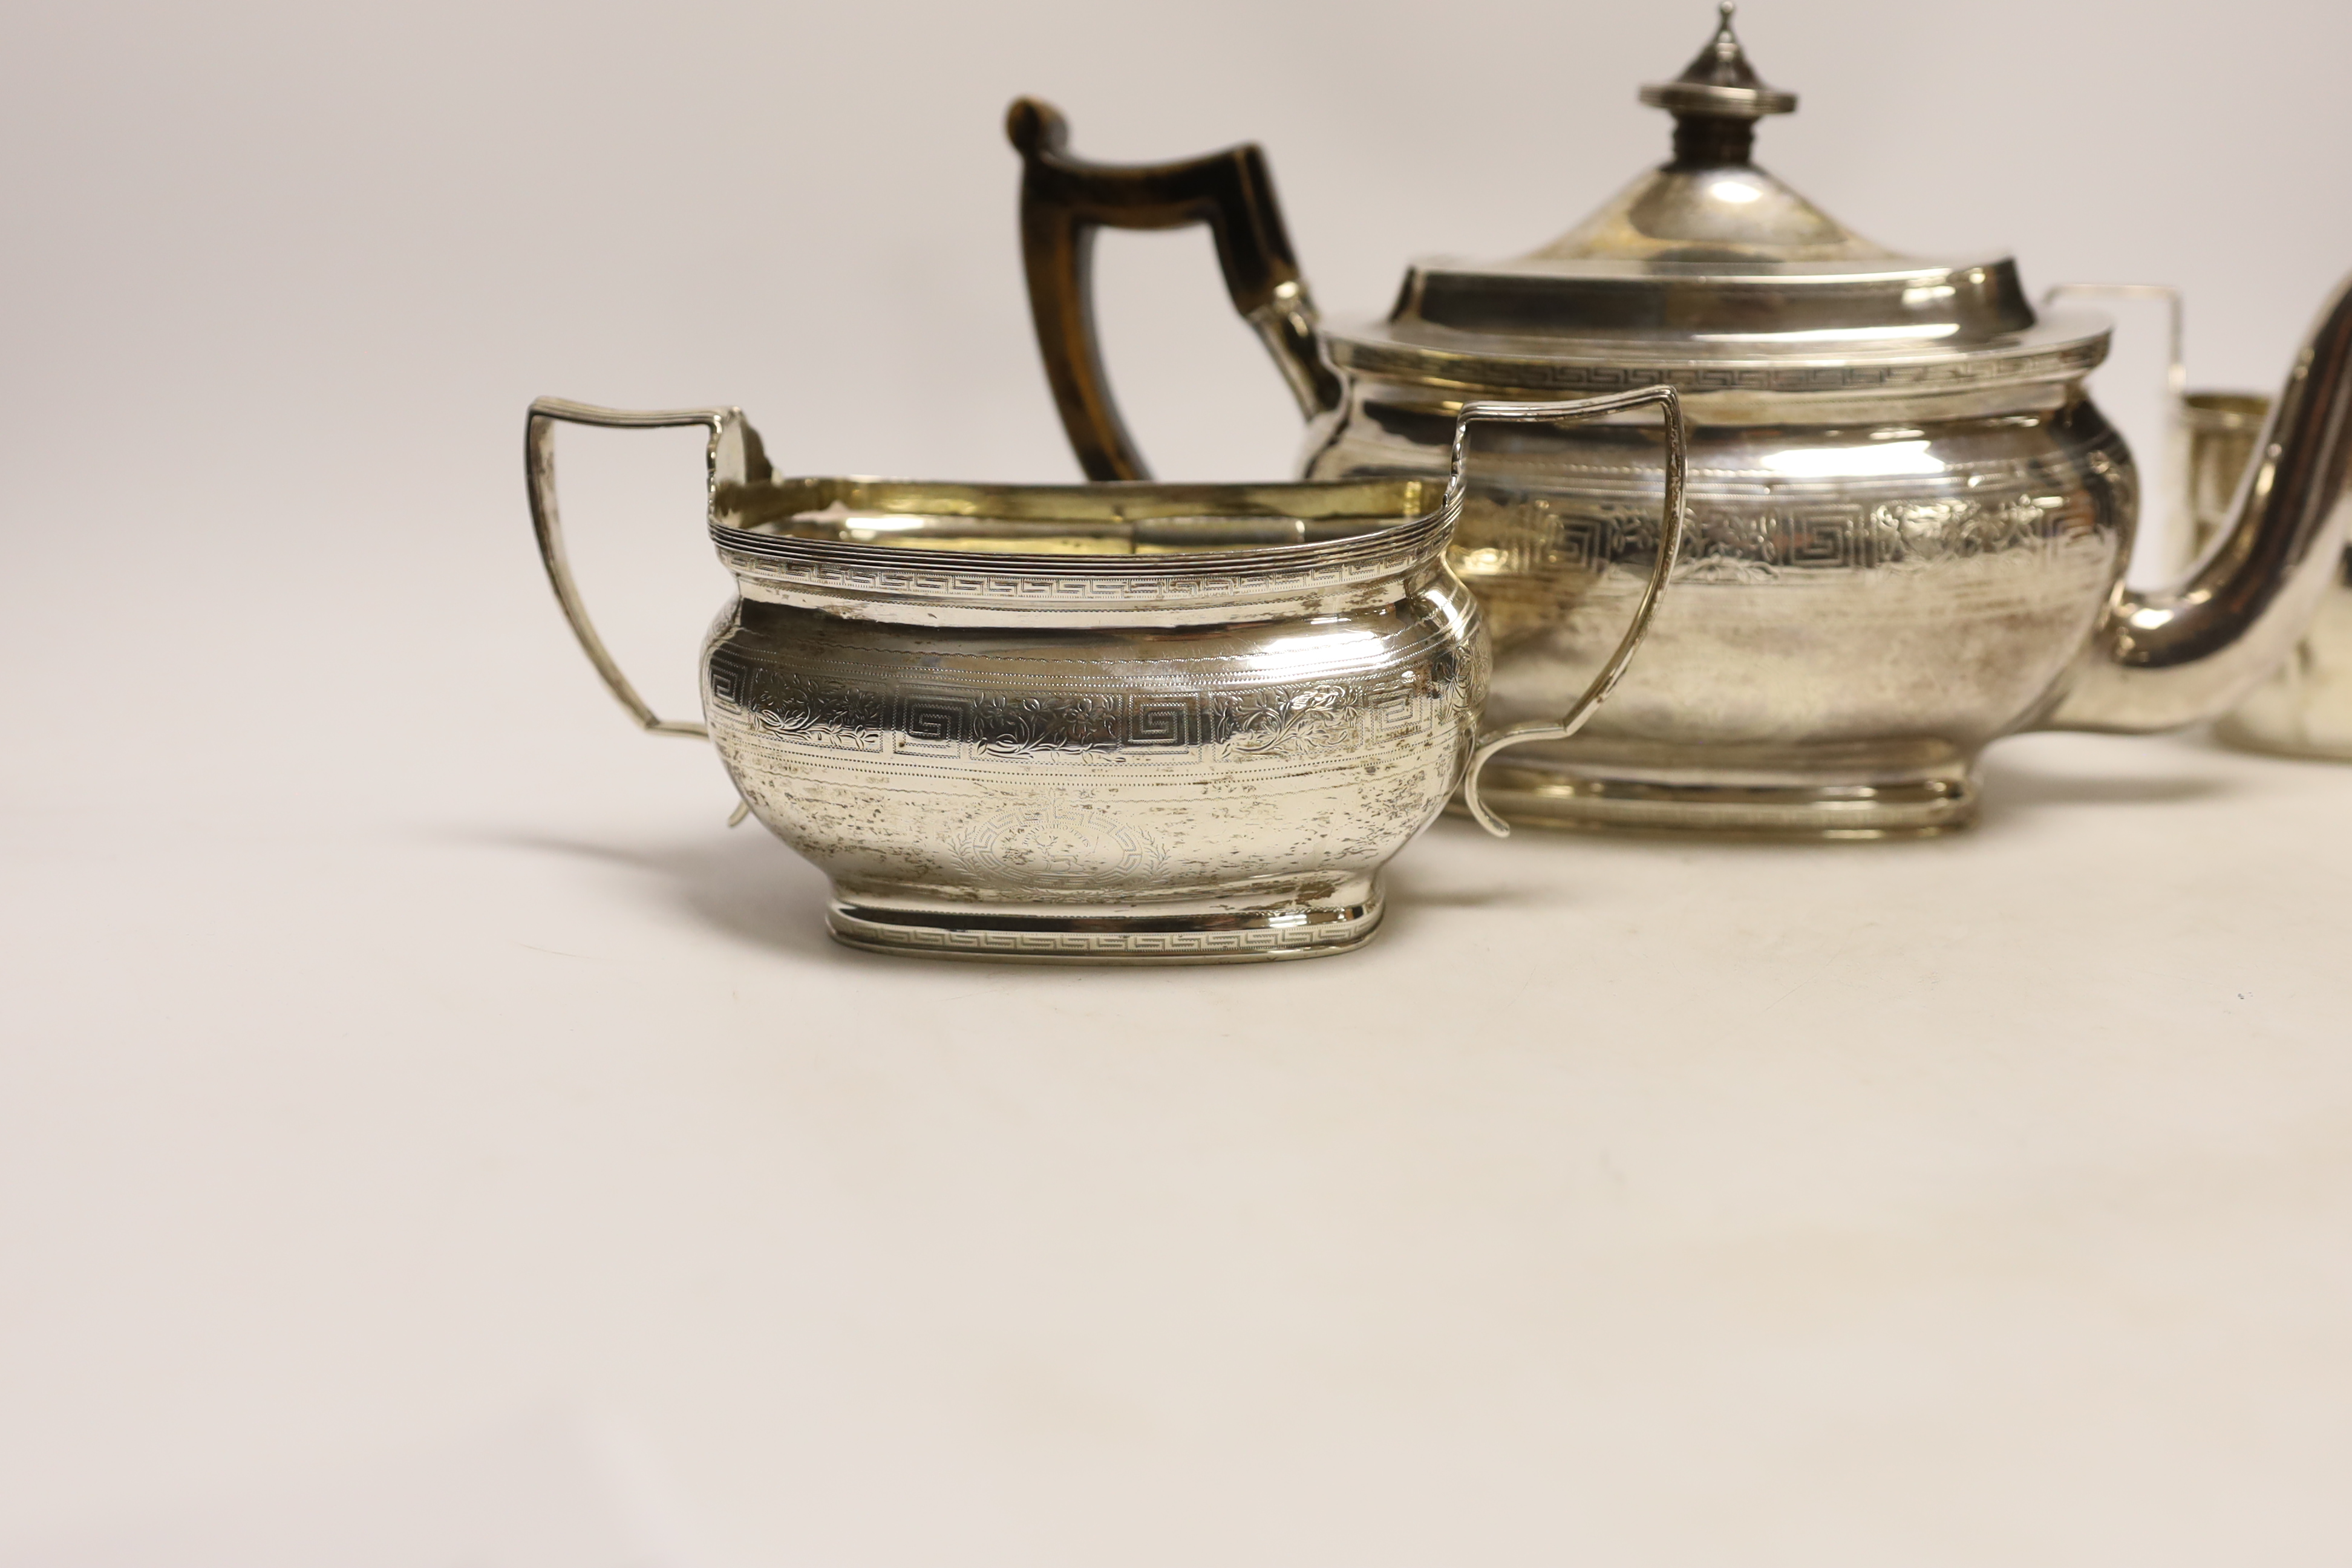 A George III engraved silver teapot and sugar bowl, by Andrew Fogelberg, London, 1805 and a similar matched silver cream jug, maker's mark rubbed, London, 1806